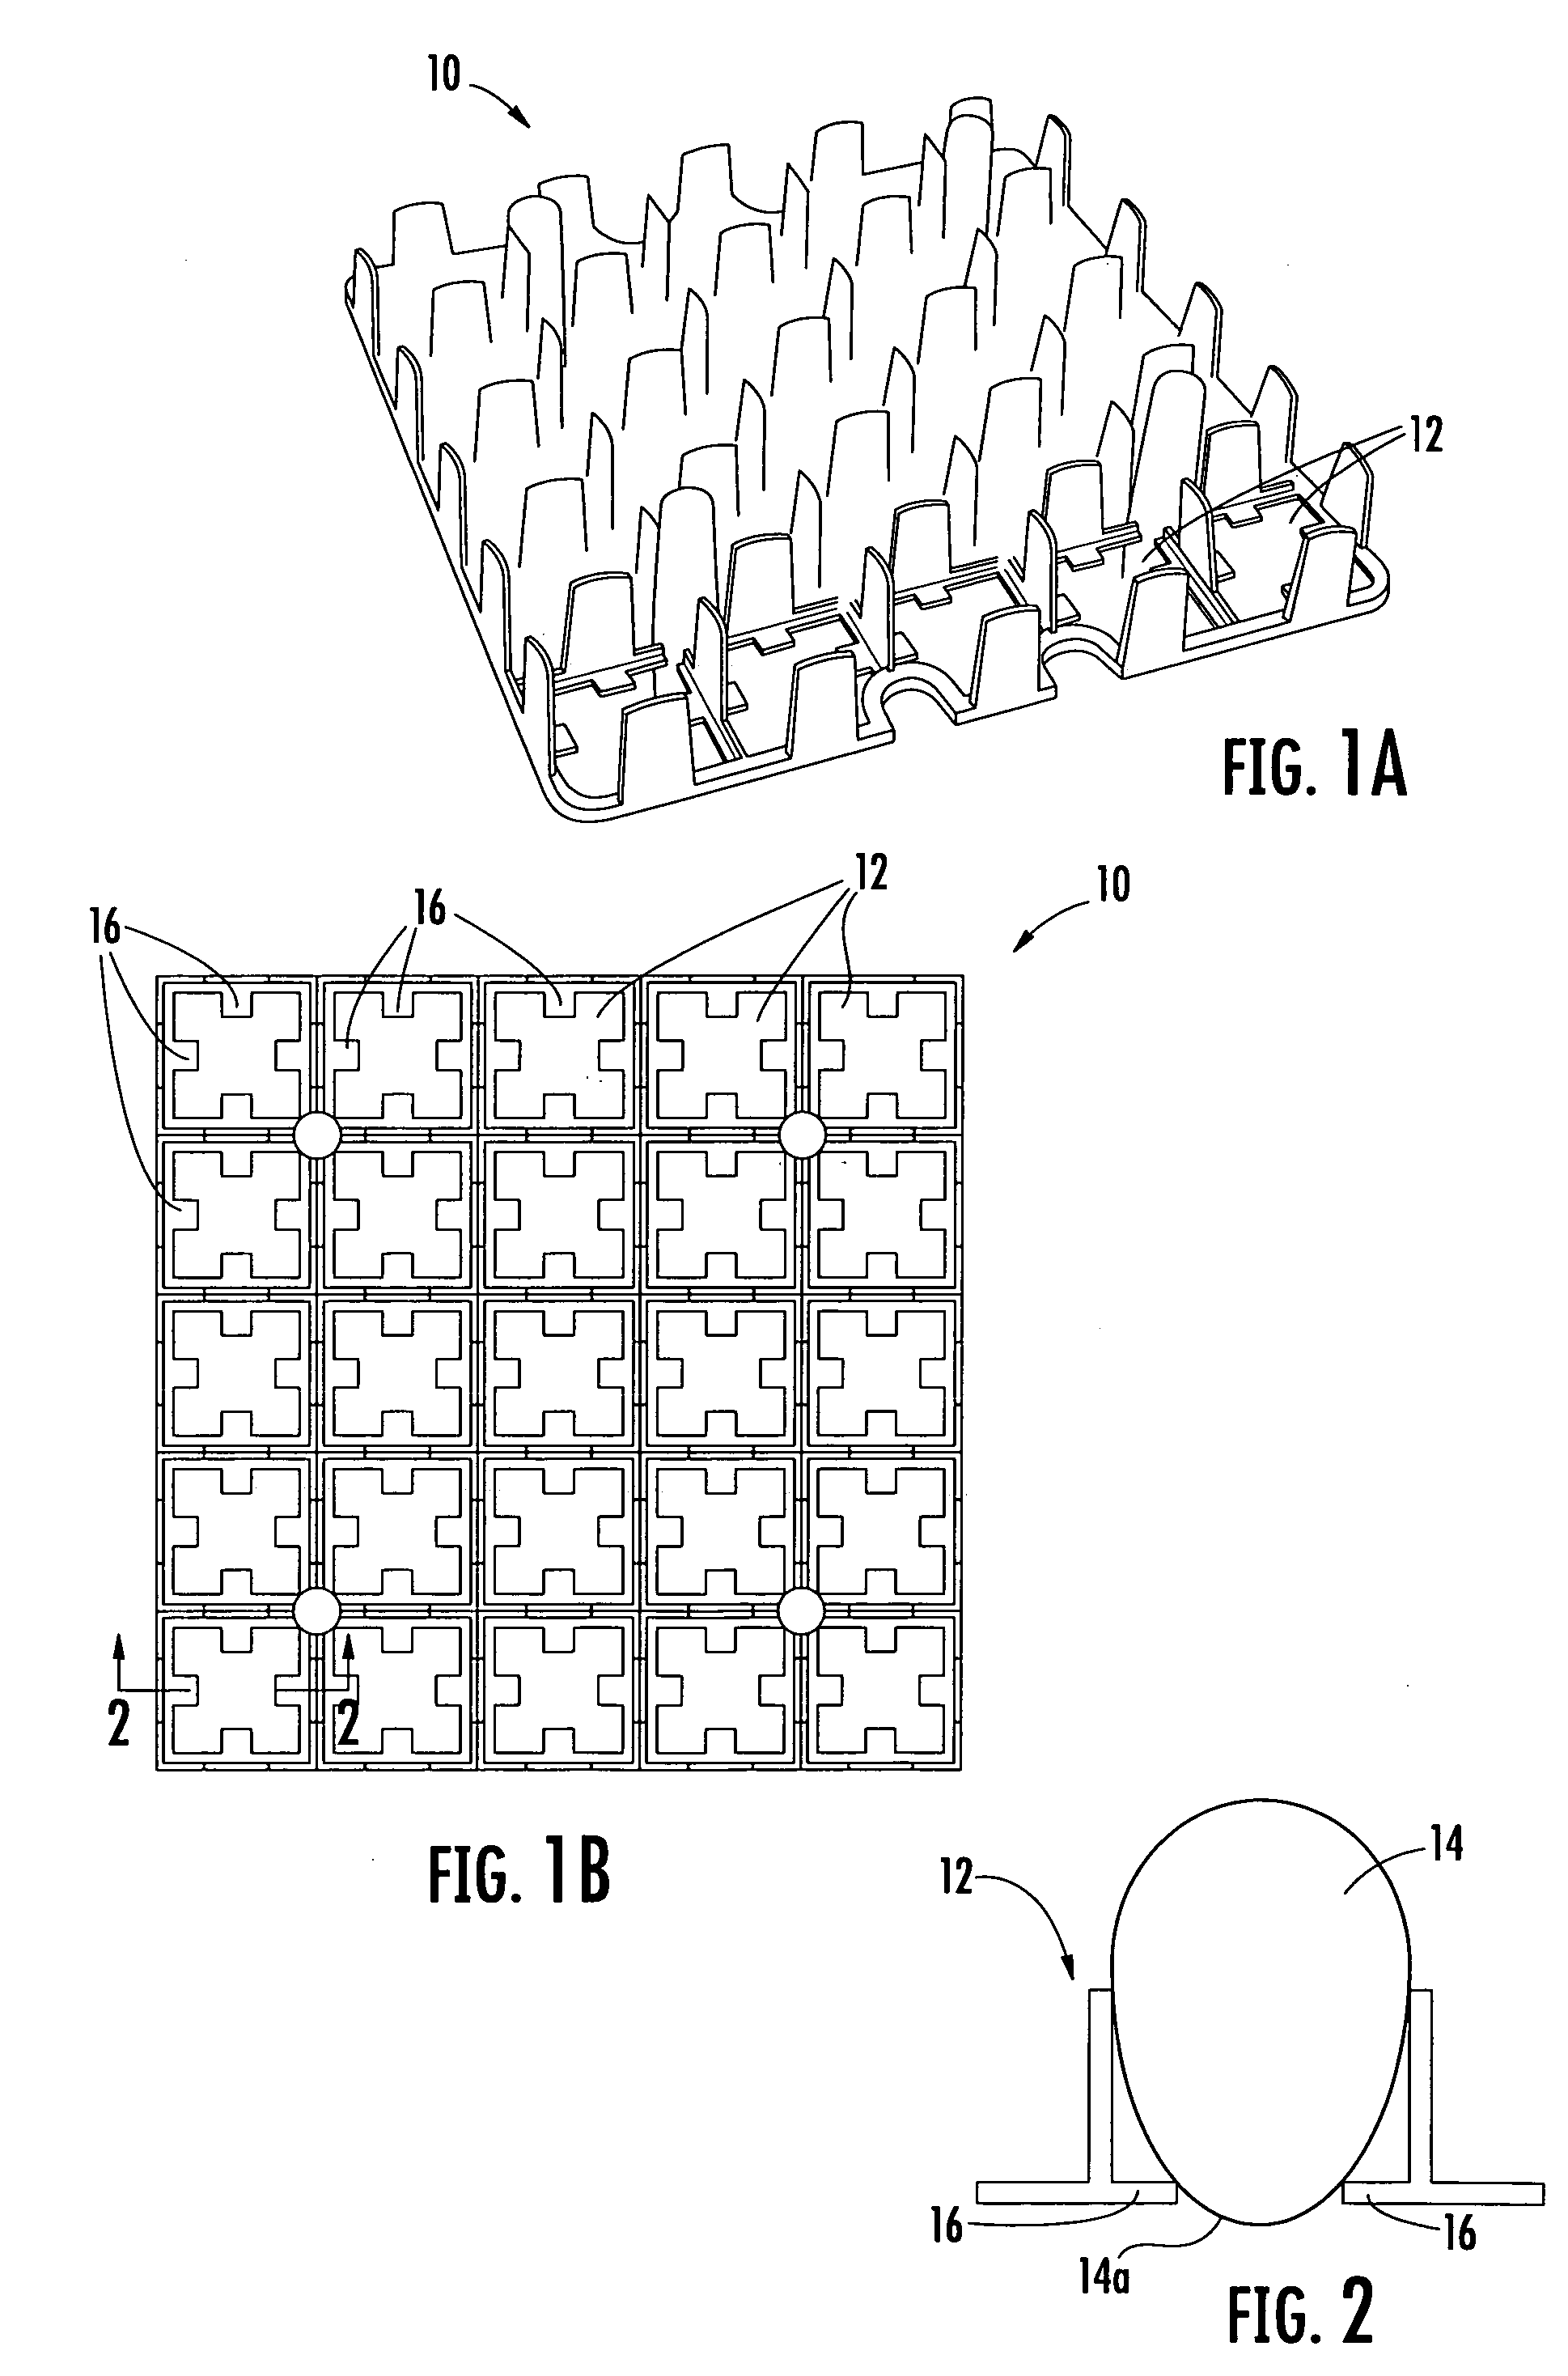 Methods and apparatus for detecting the presence of eggs in an egg flat